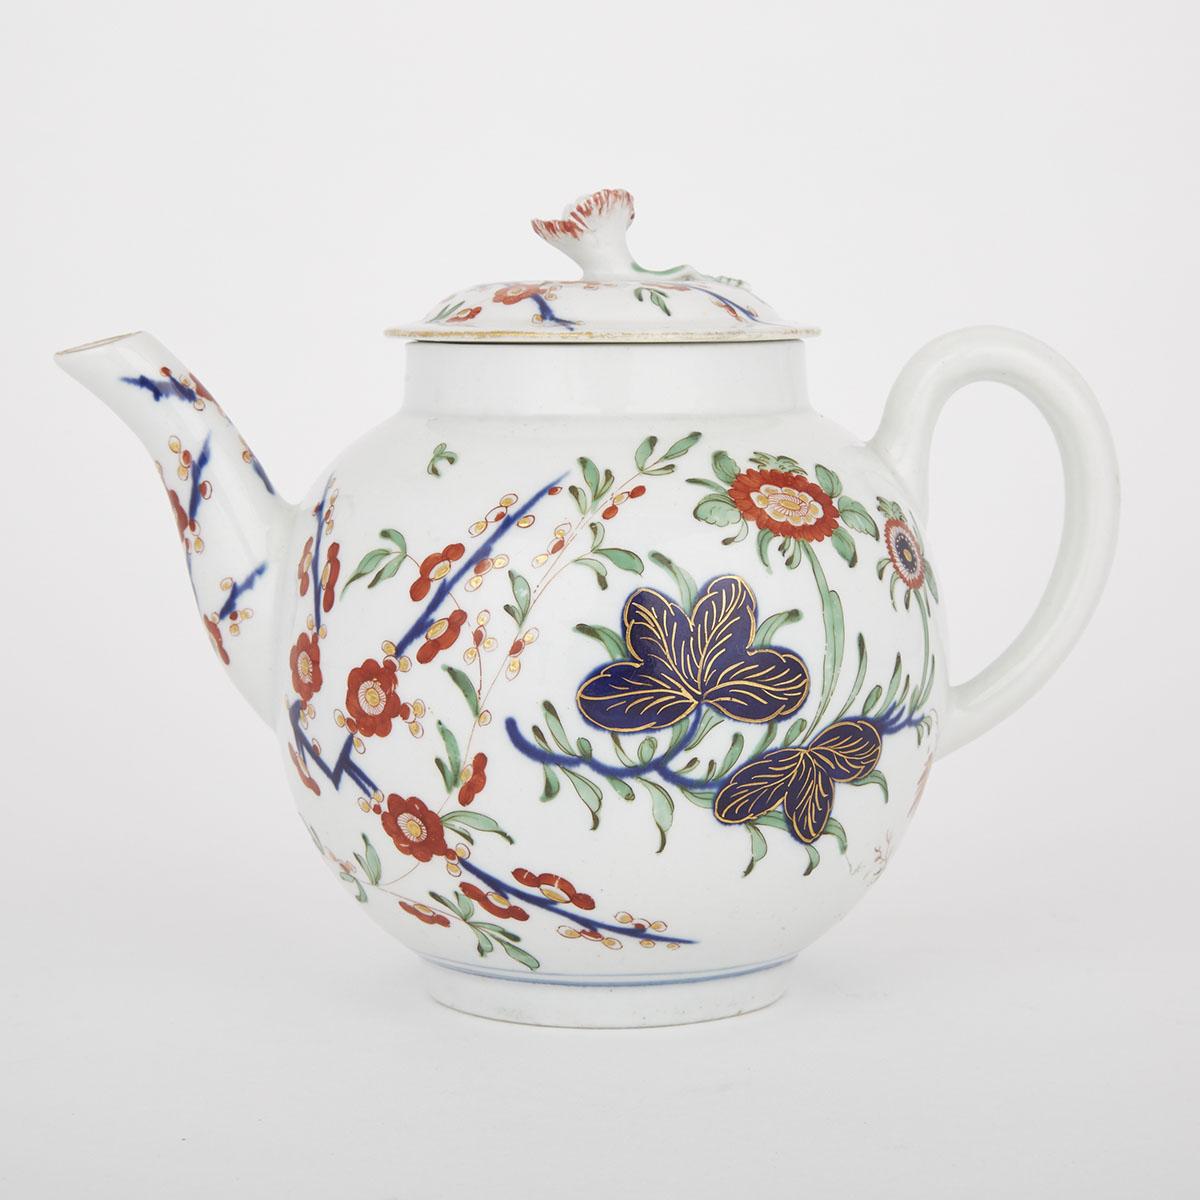 WORCESTER TEAPOT AND COVER, C.1770painted in underglaze blue, coloured enamels and gilt with Japan